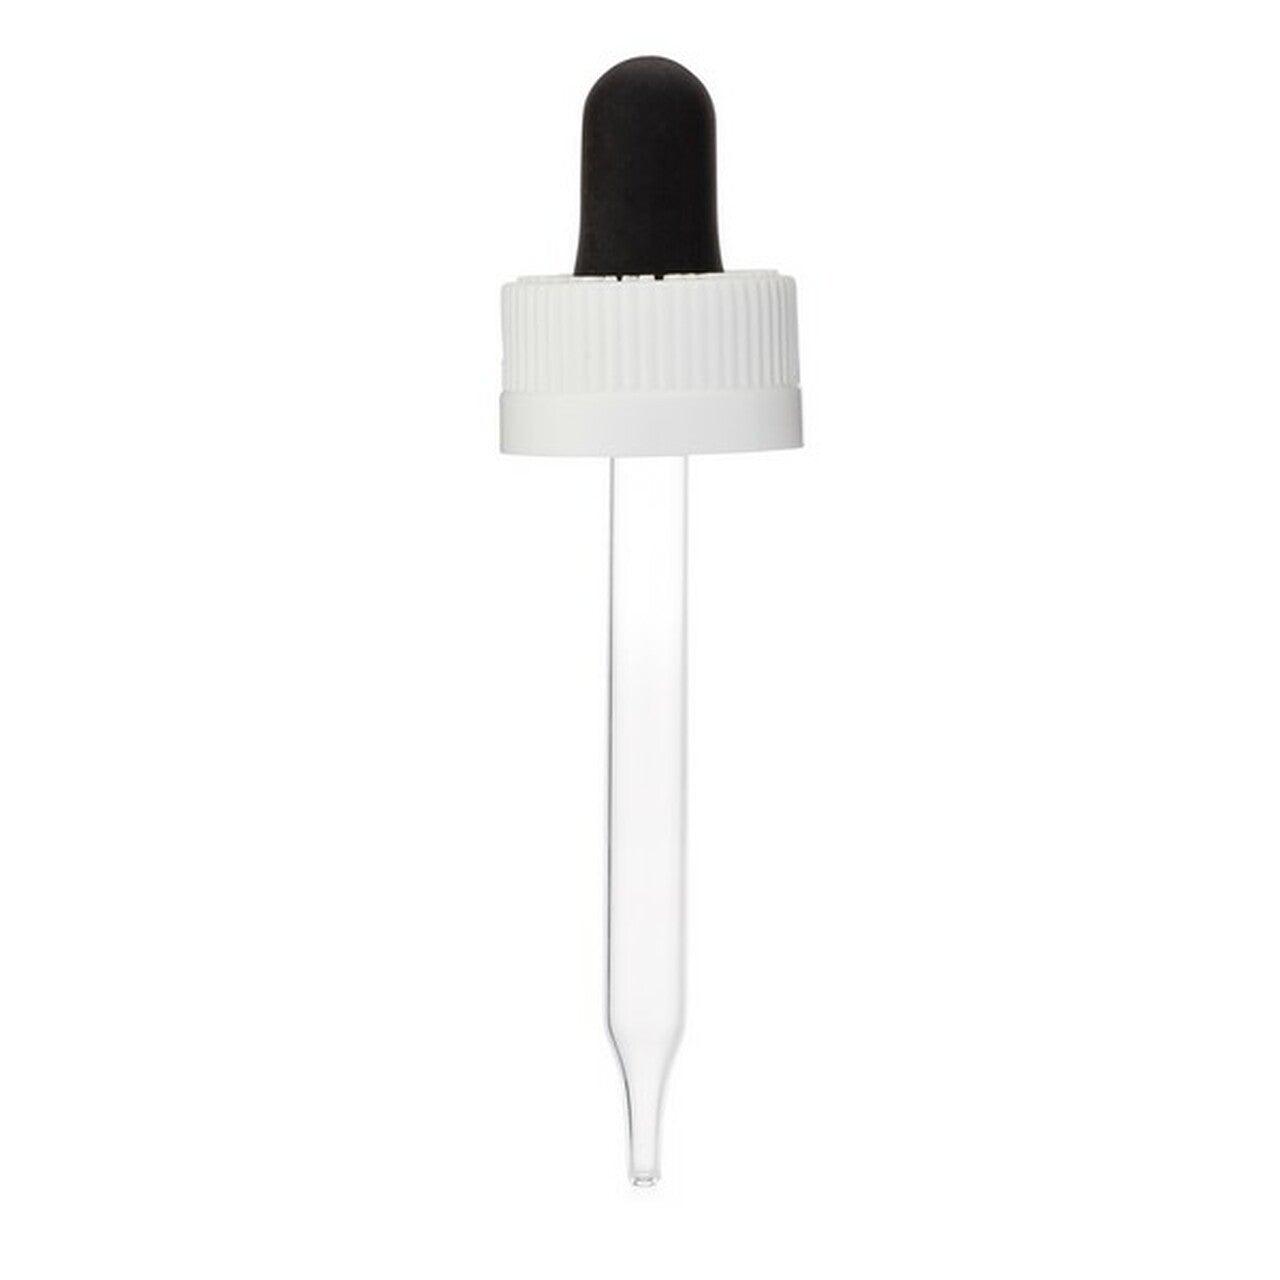 20-410 Black with White Collar Glass Dropper for 50ml Amber Glass - Soap supplies,Soap supplies Canada,Soap supplies Calgary, Soap making kit, Soap making kit Canada, Soap making kit Calgary, Do it yourself soap kit, Do it yourself soap kit Canada,  Do it yourself soap kit Calgary- Soap and More the Learning Centre Inc